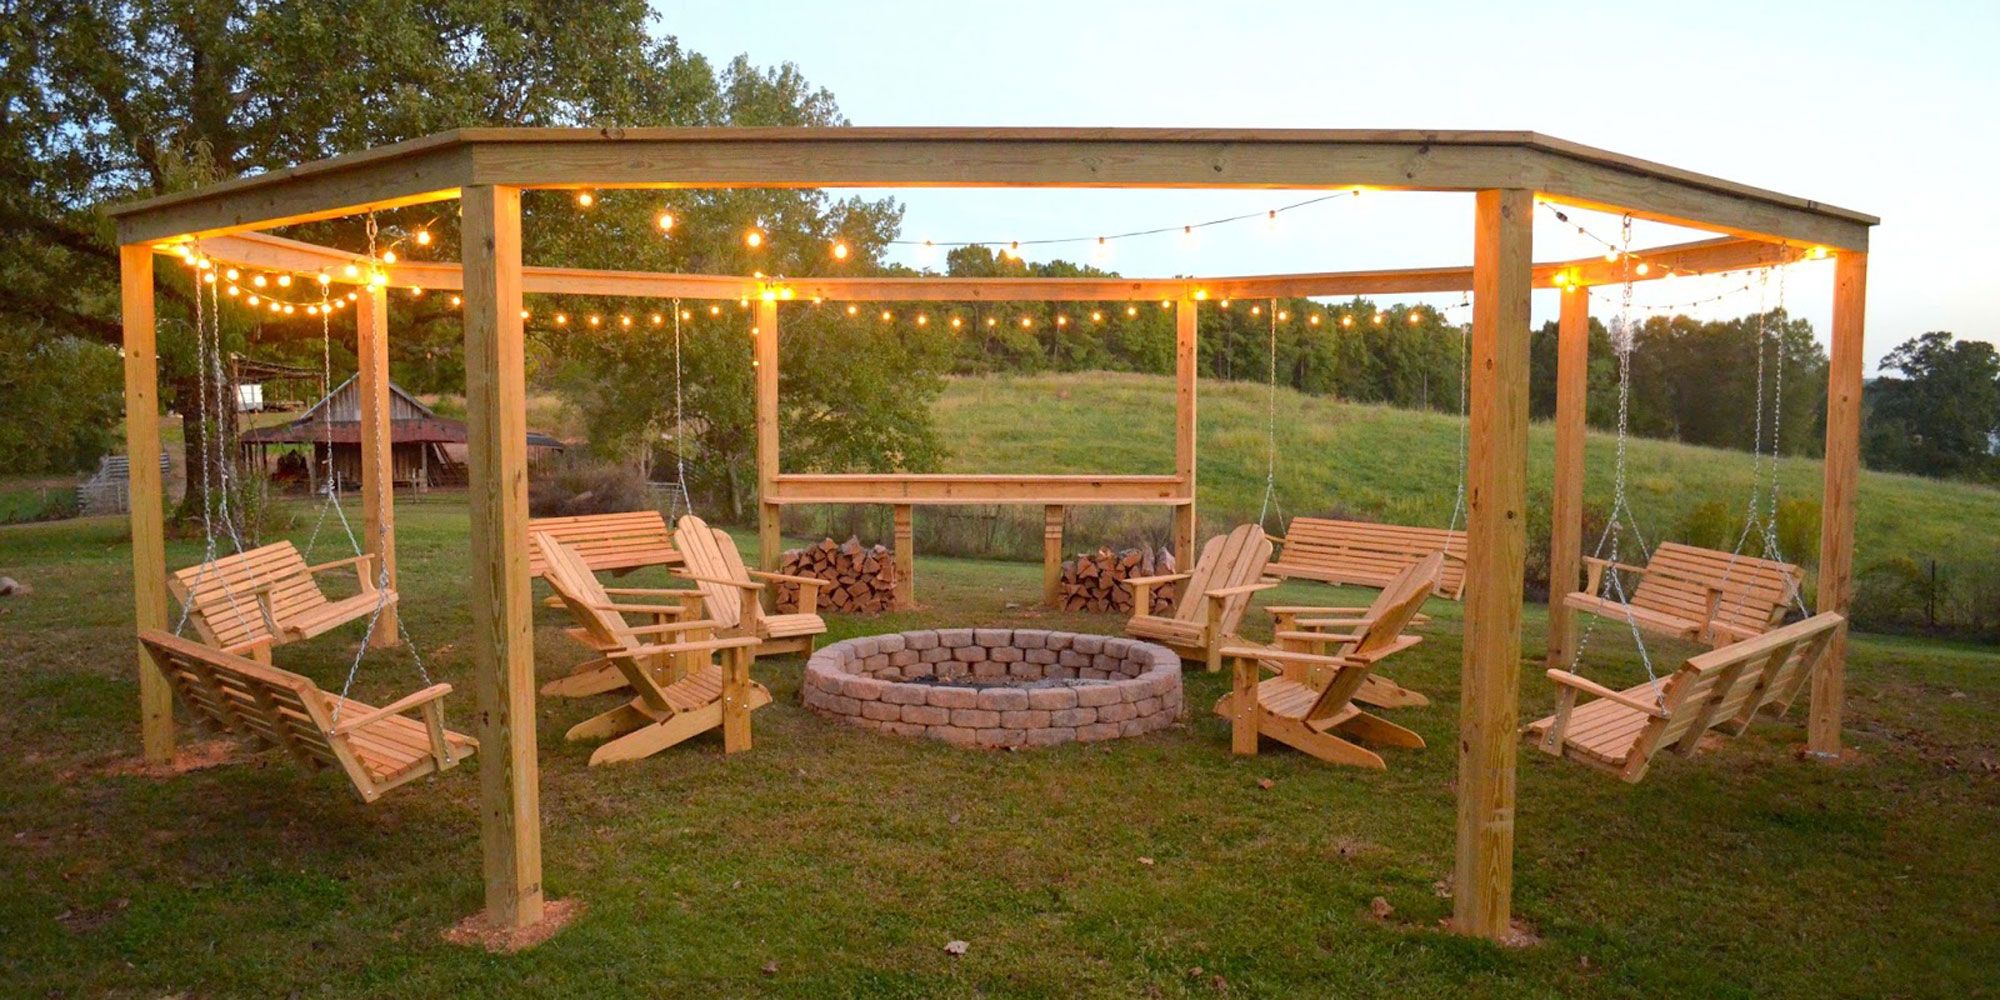 This Diy Backyard Pergola Is The, How To Set Up A Fire Pit